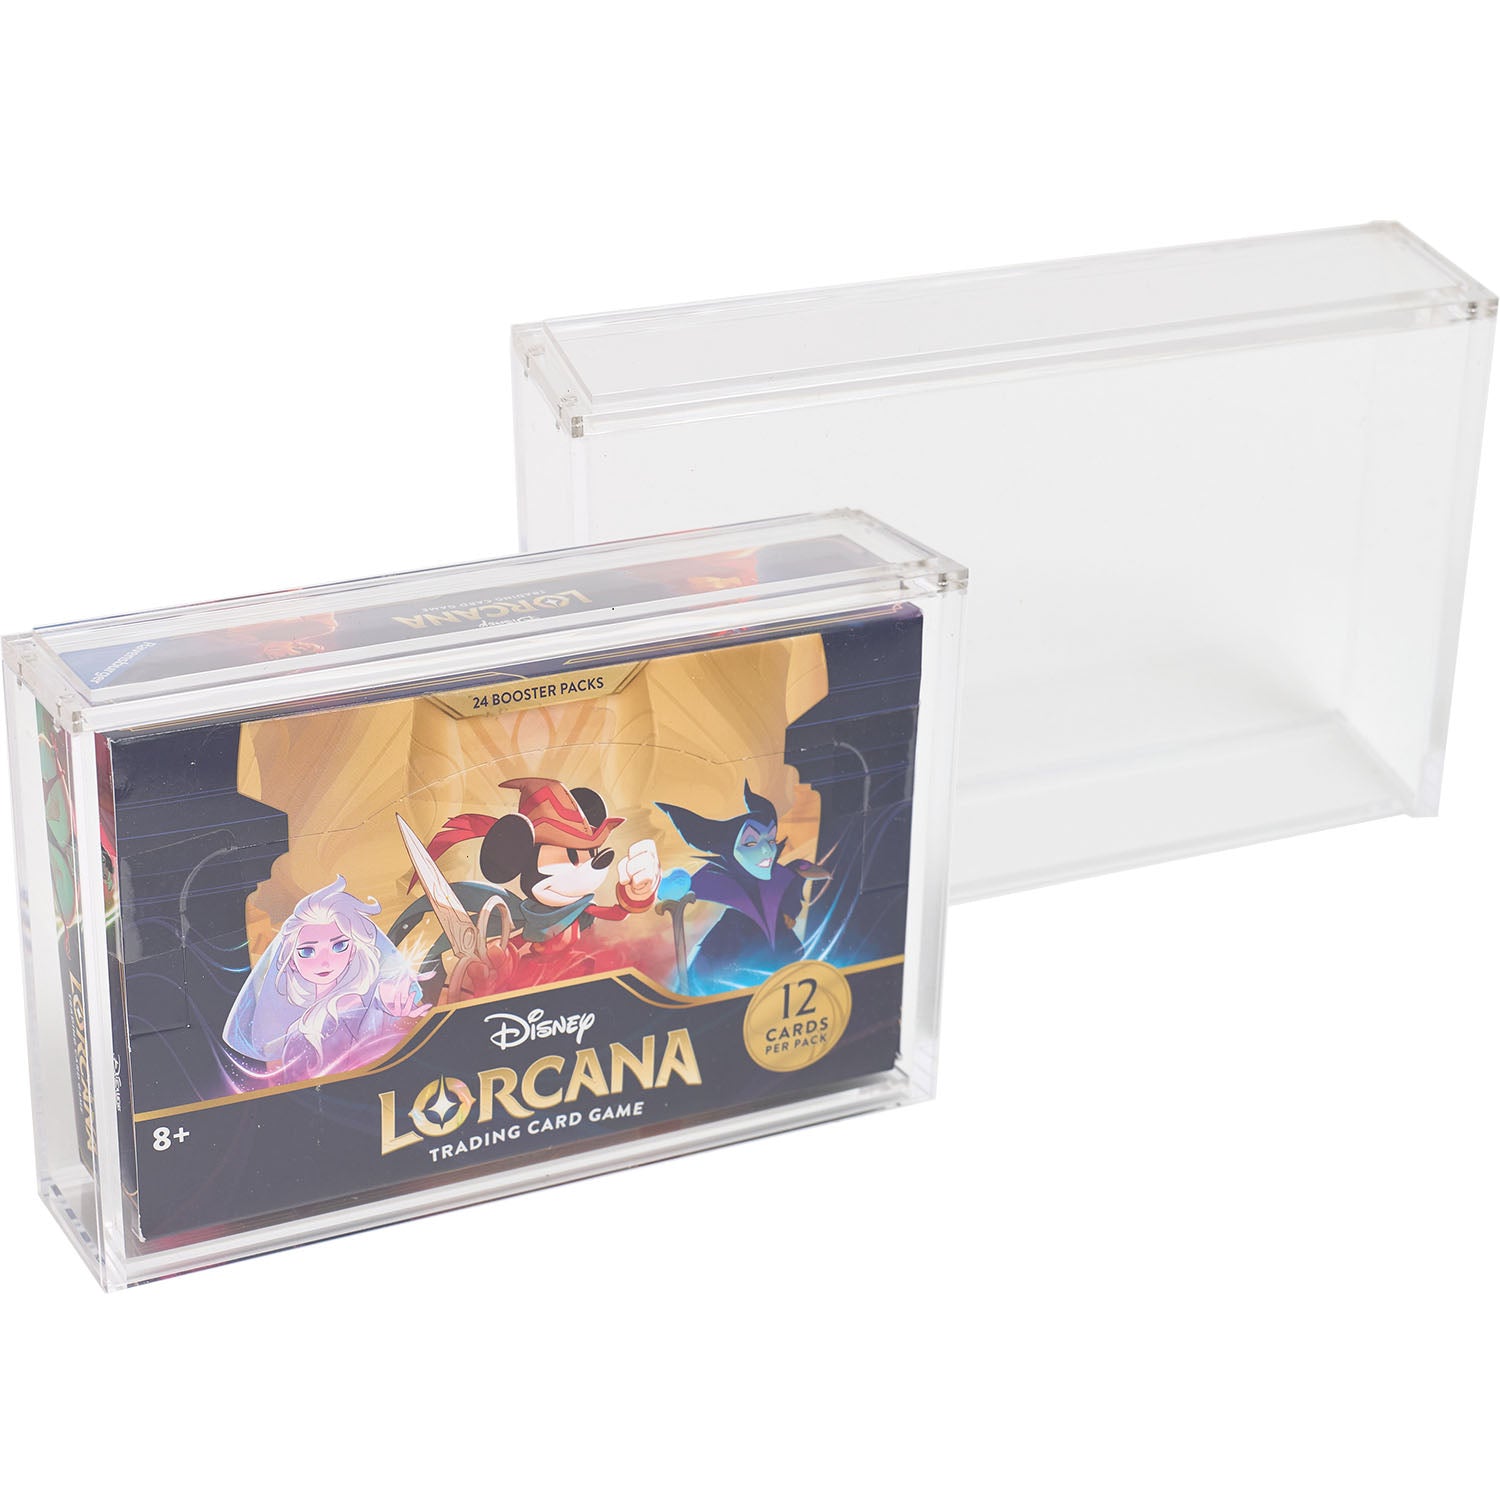 Premium Acrylic Case for Disney Lorcana Booster Box with Magnetic Top